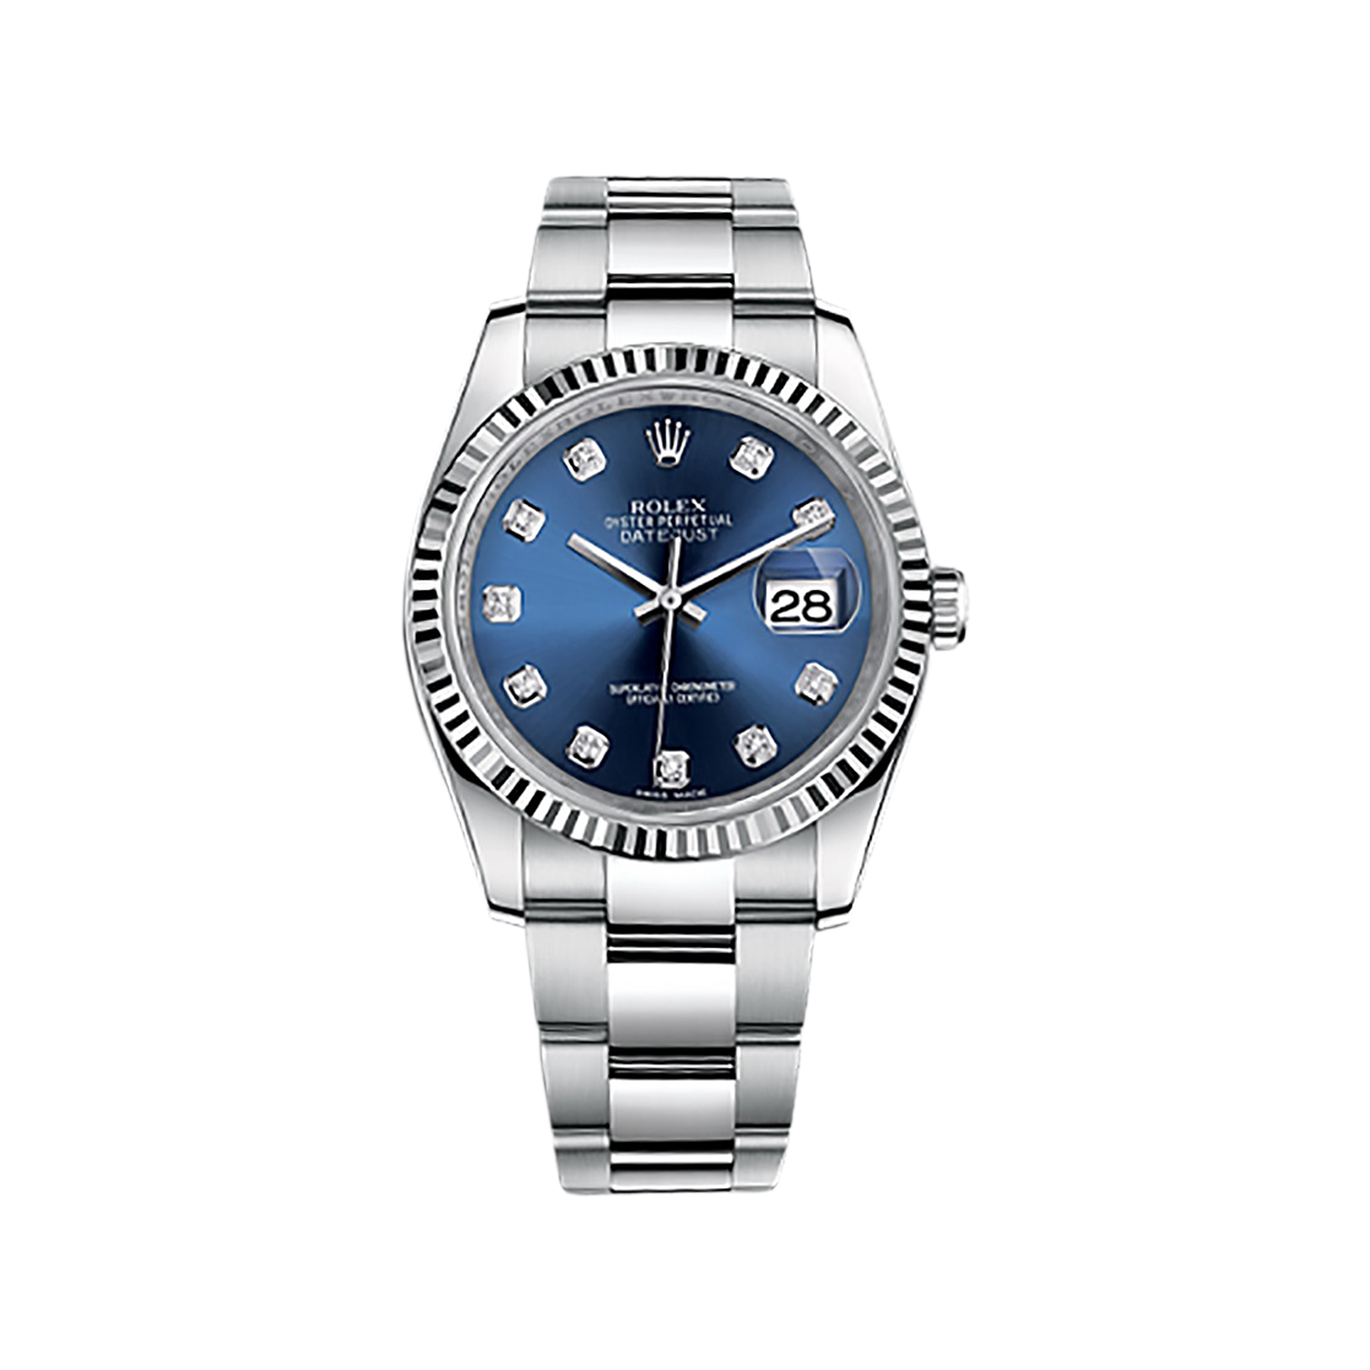 Datejust 36 116234 White Gold & Stainless Steel Watch (Blue Set with Diamonds) - Click Image to Close